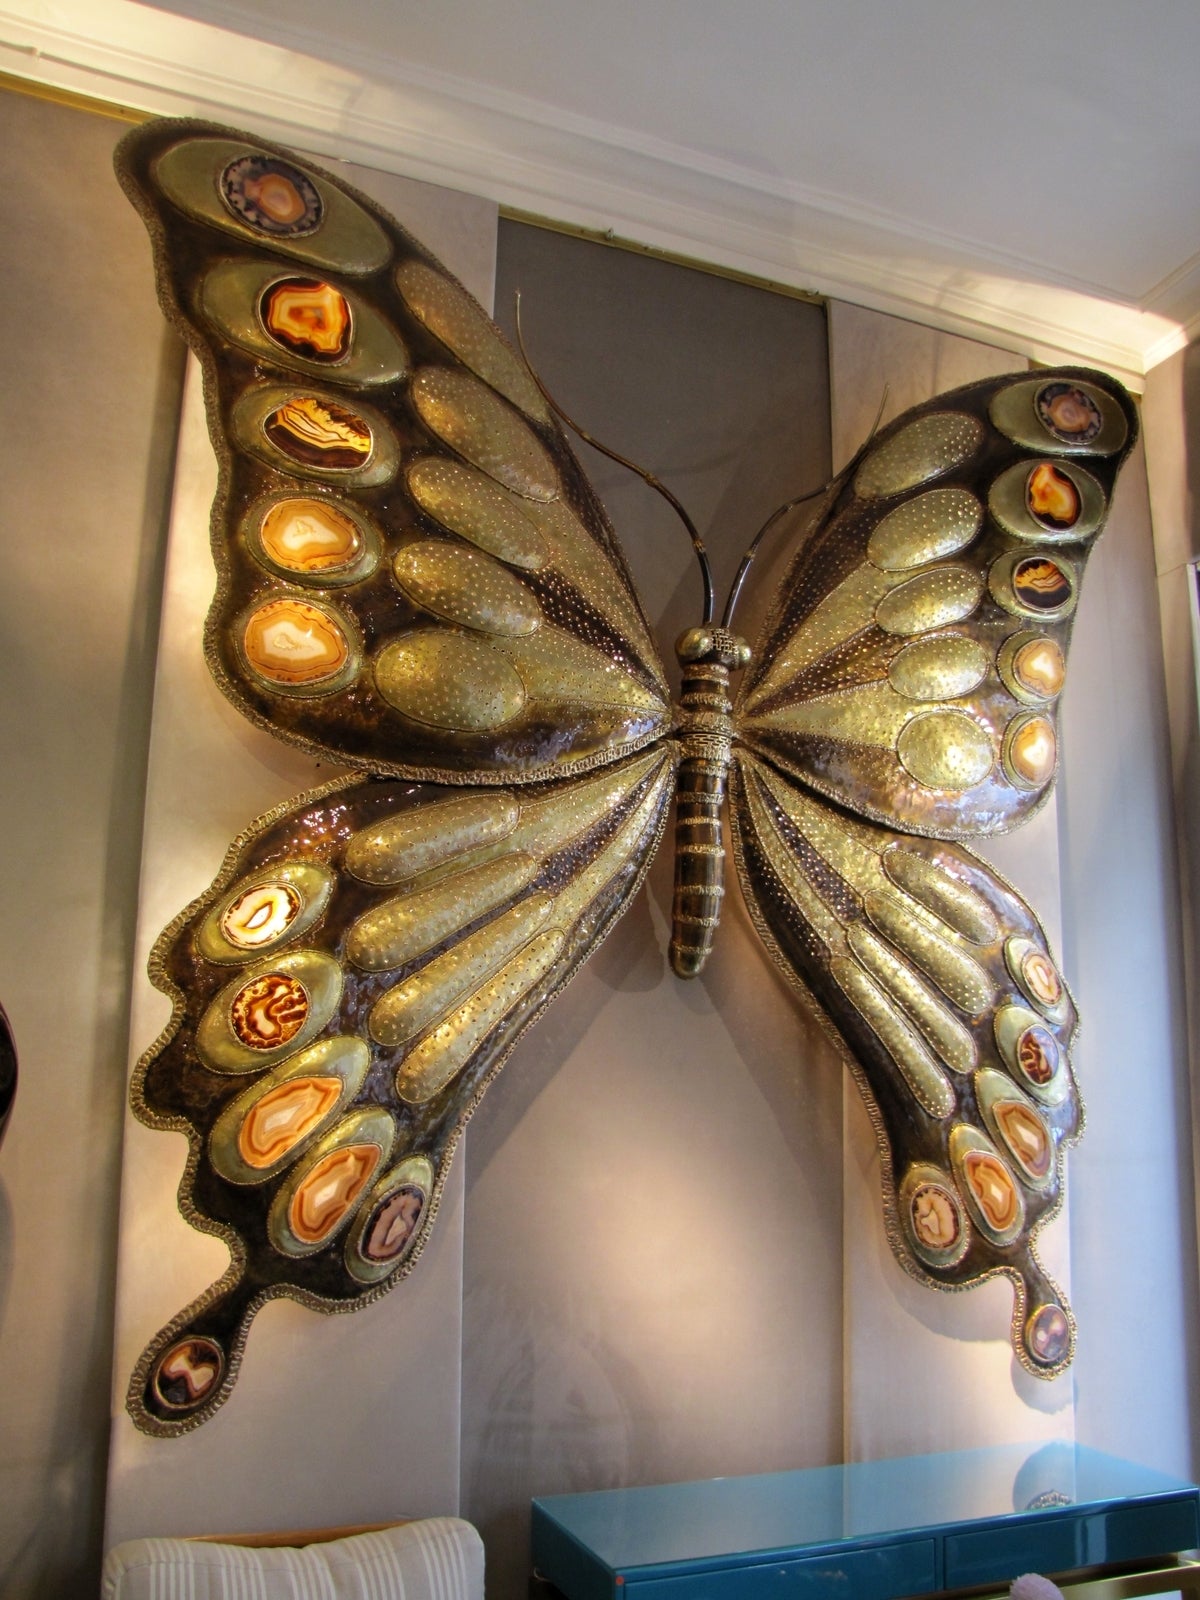 Magnificent and monumental luminous butterfly by Richard Faure, unique piece.
It's entirely handmade, in worked brass with 22 slices of agate inlaid in the metal, behind which are hidden light bulbs.
The electrical system has been completely